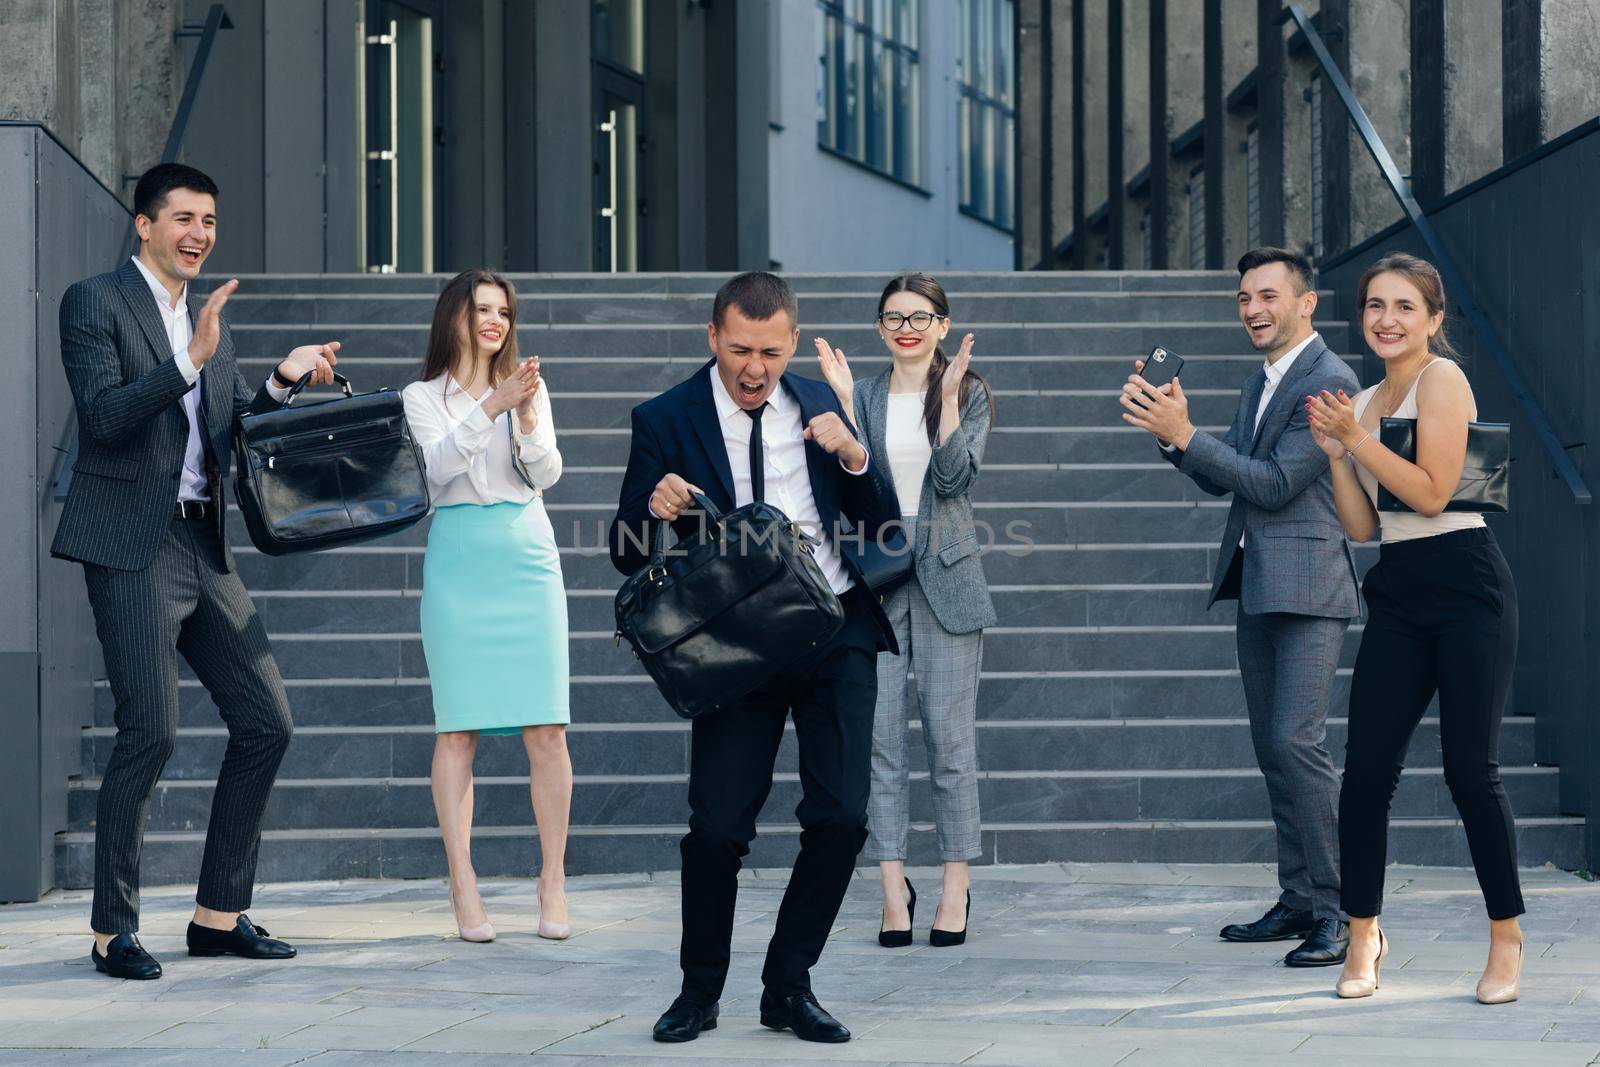 Young Happy Business Manager Wearing a Suit and Tie Dancing from Office Building. Colleagues are Cheering. Diverse and Motivated Business People from Modern Office.